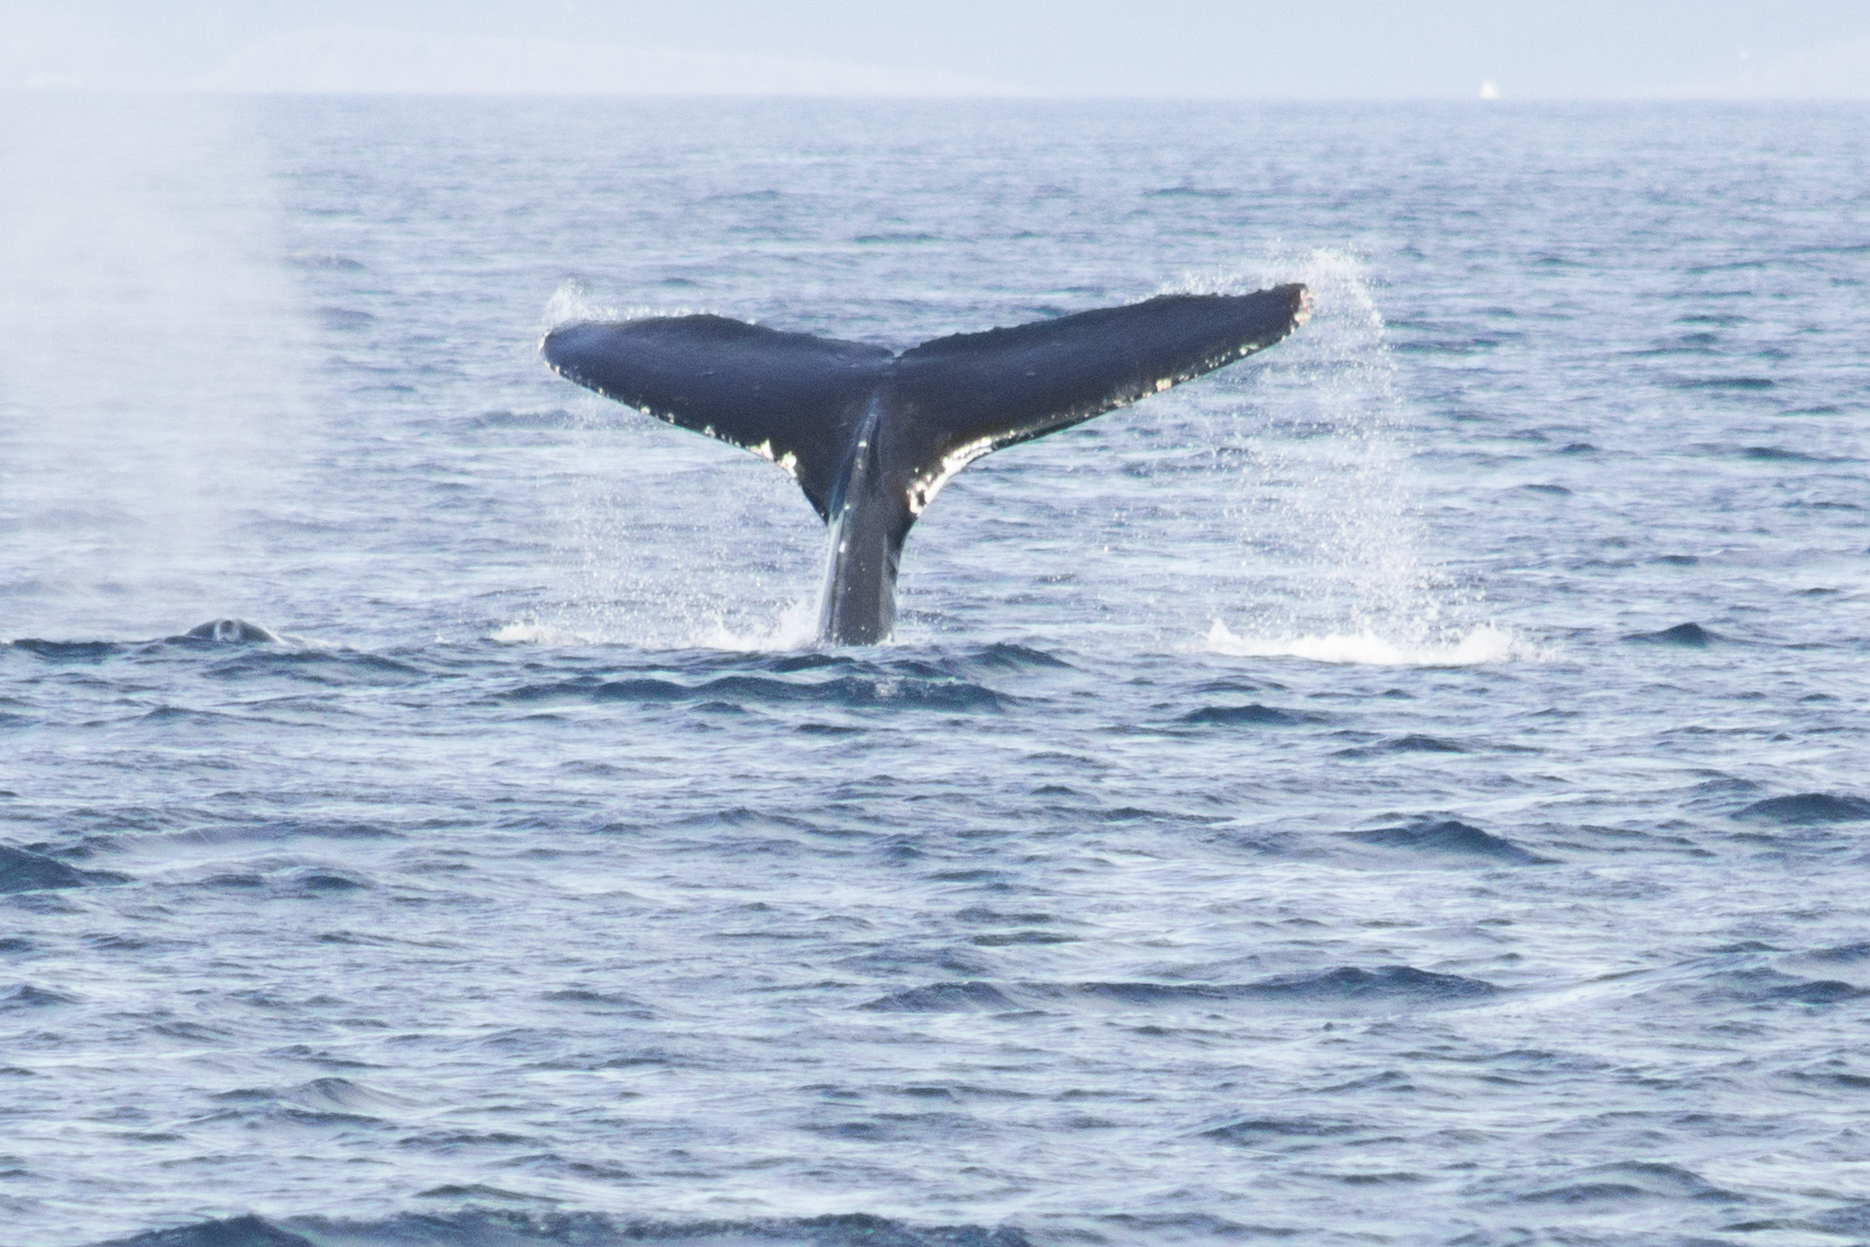 Whale watching in the San Juan Islands